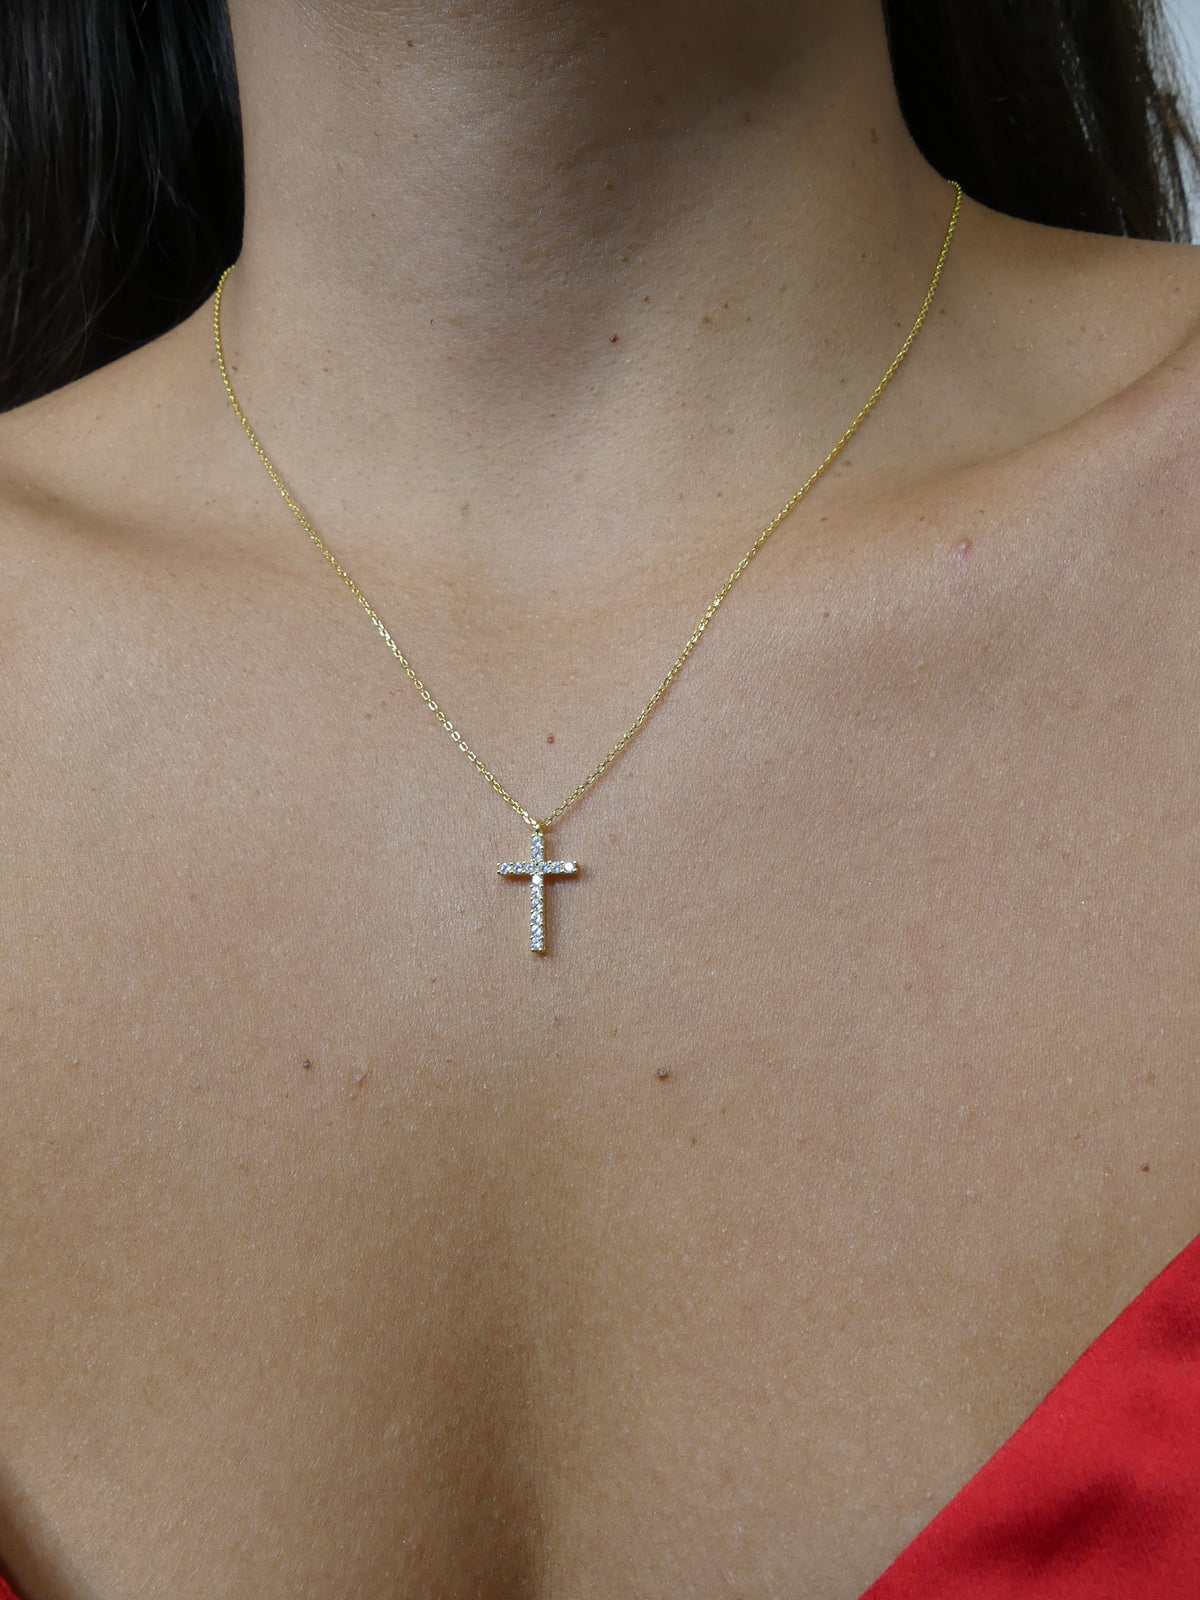 cross necklace, necklaces, gold cross necklaces, gold plated jewelry, gold accessories, waterproof jewelry, rhinestone necklaces, cross necklace, gold jewelry, dainty gold necklaces, cross necklaces, dainty gold jewelry, kesley jewelry